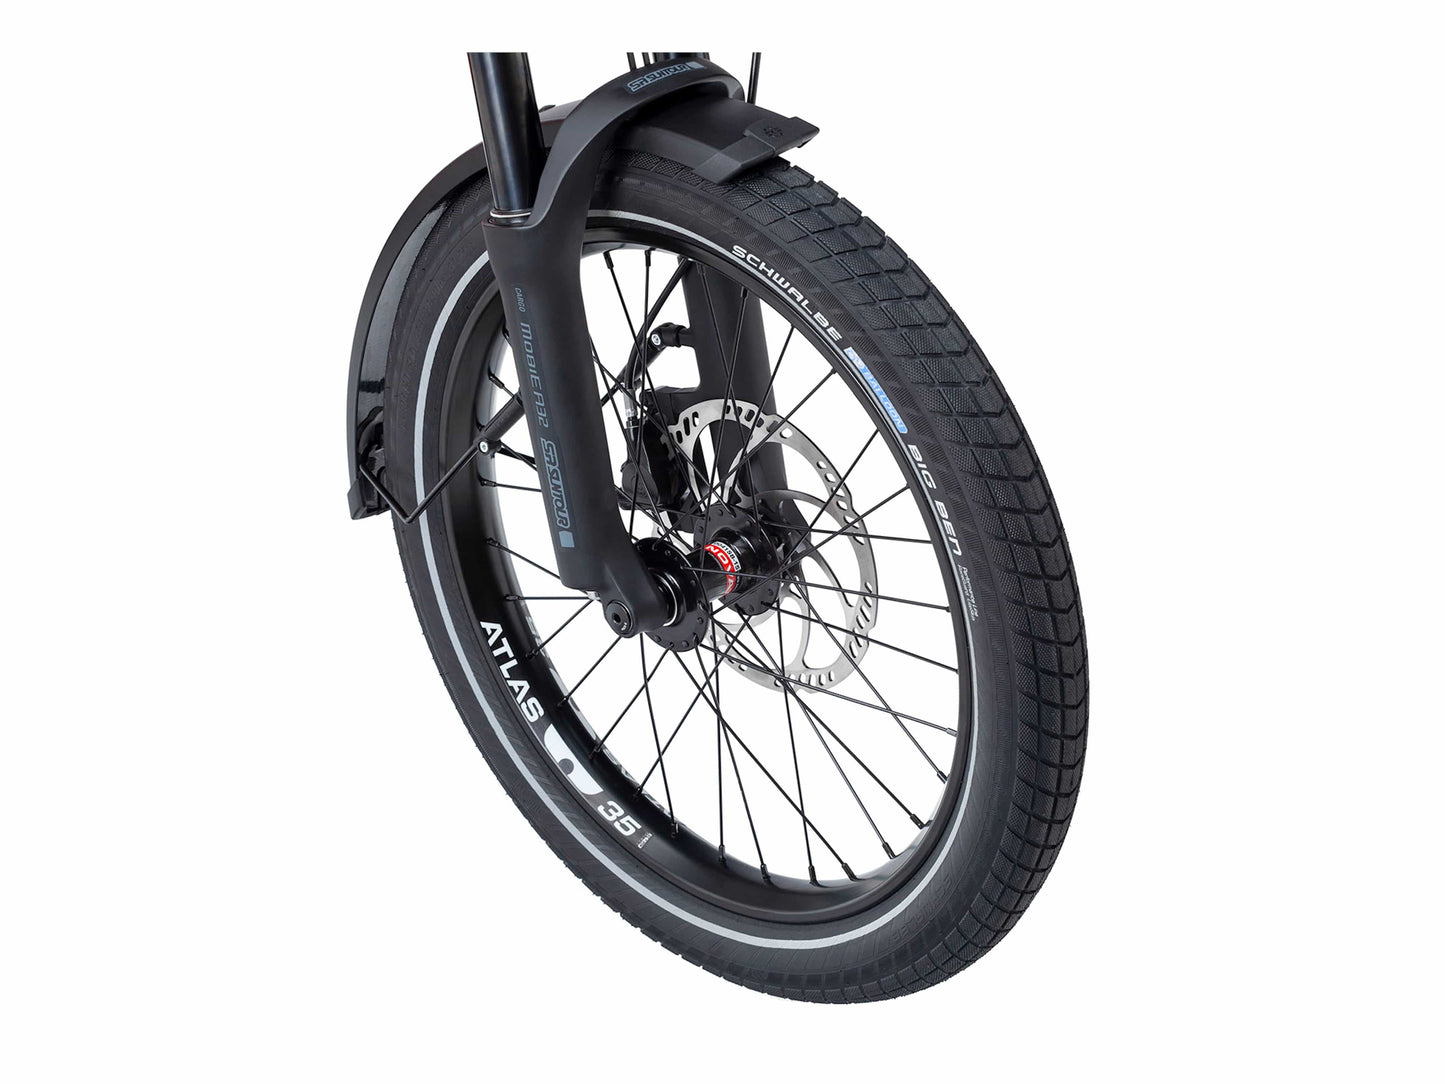 Tern HSD S8i electric bike tundra close up front wheel fork